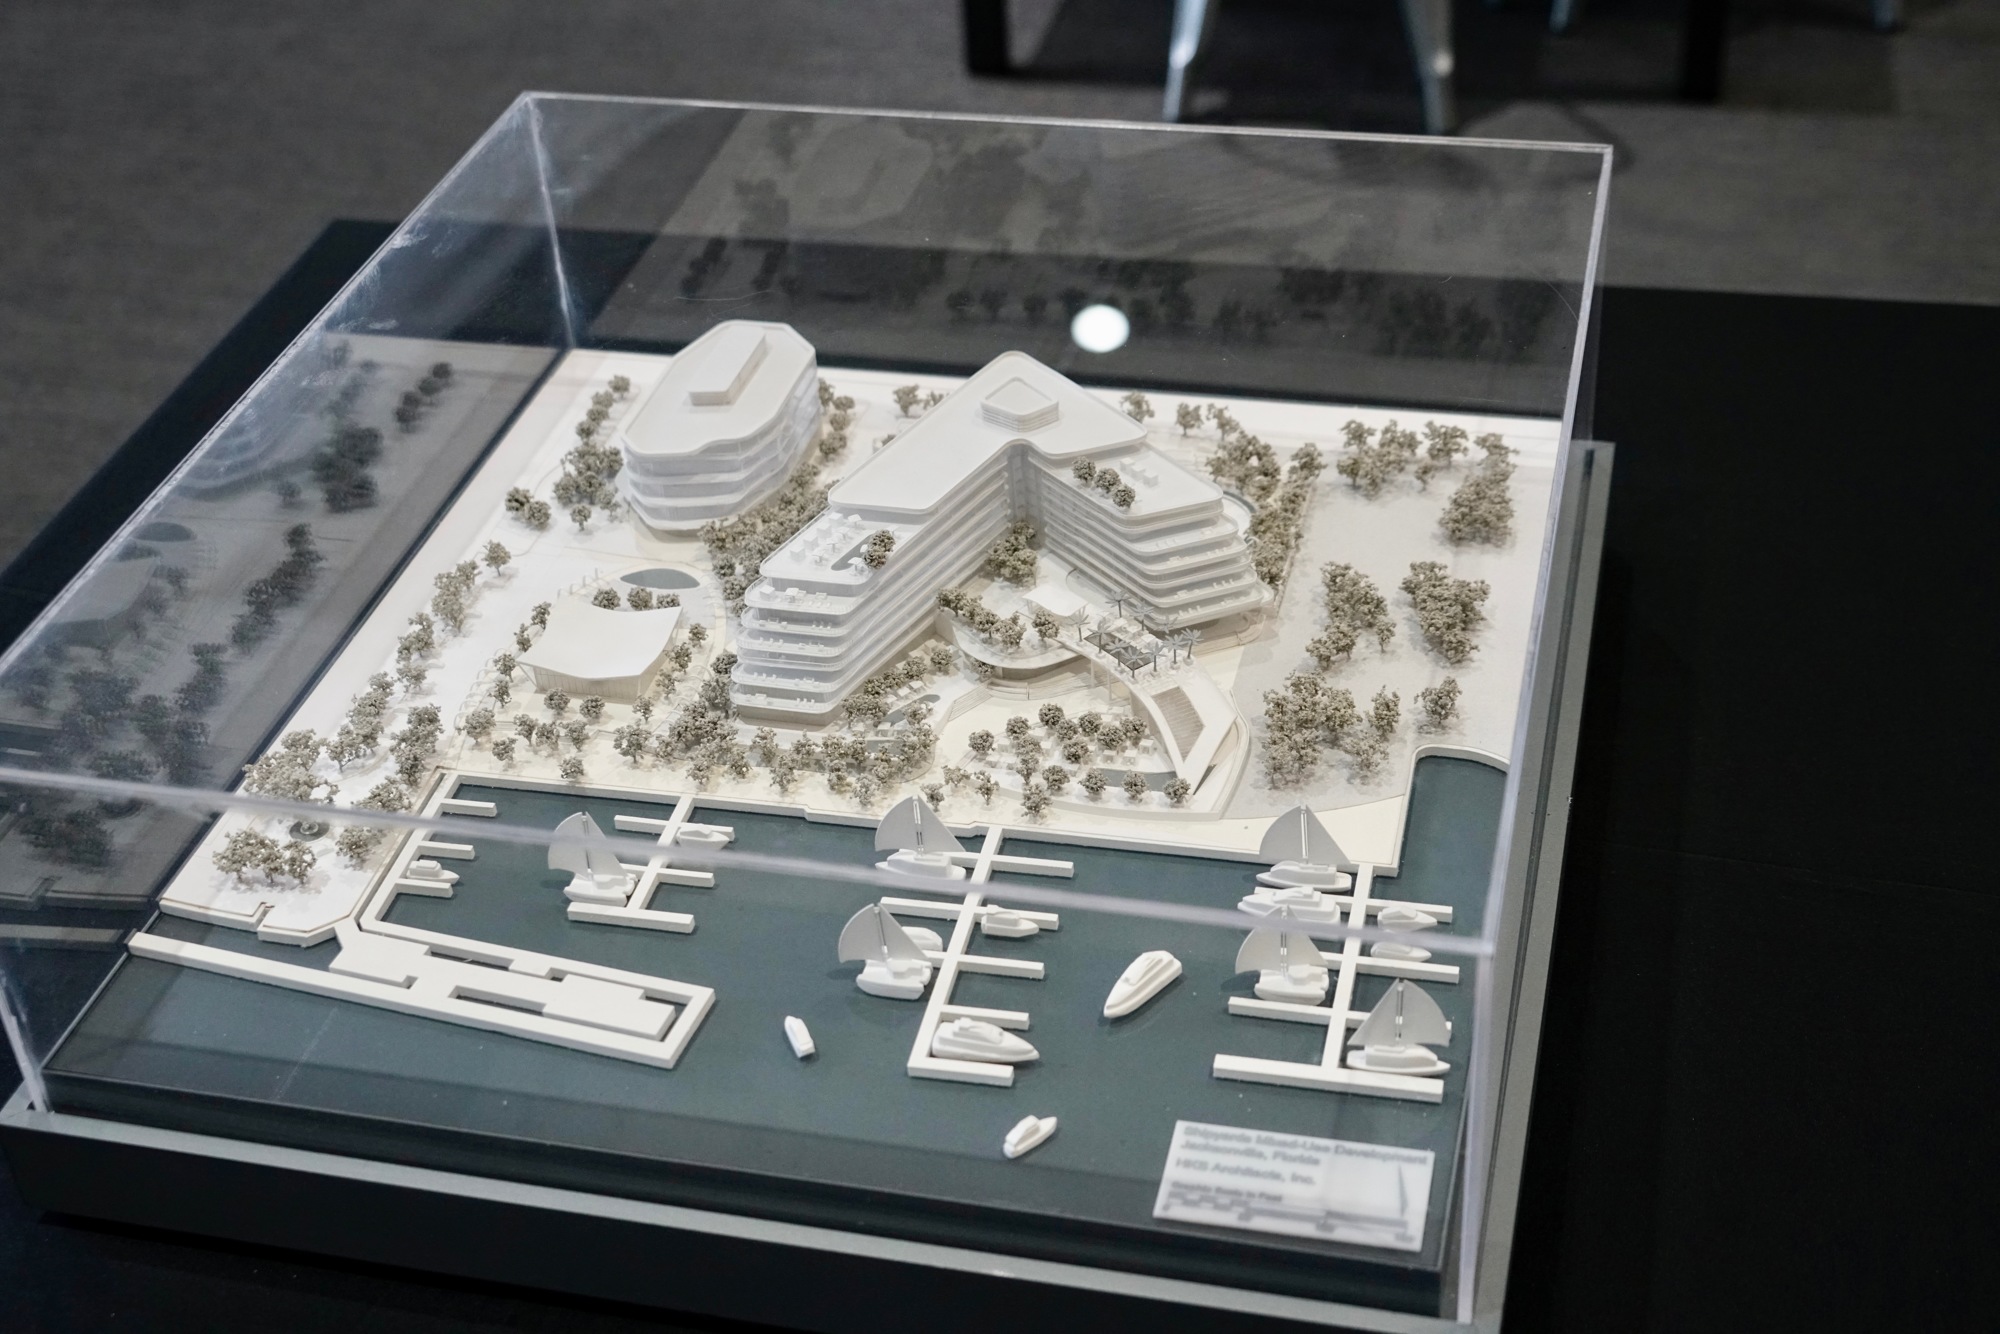 A model of the first phase of the Shipyards development.